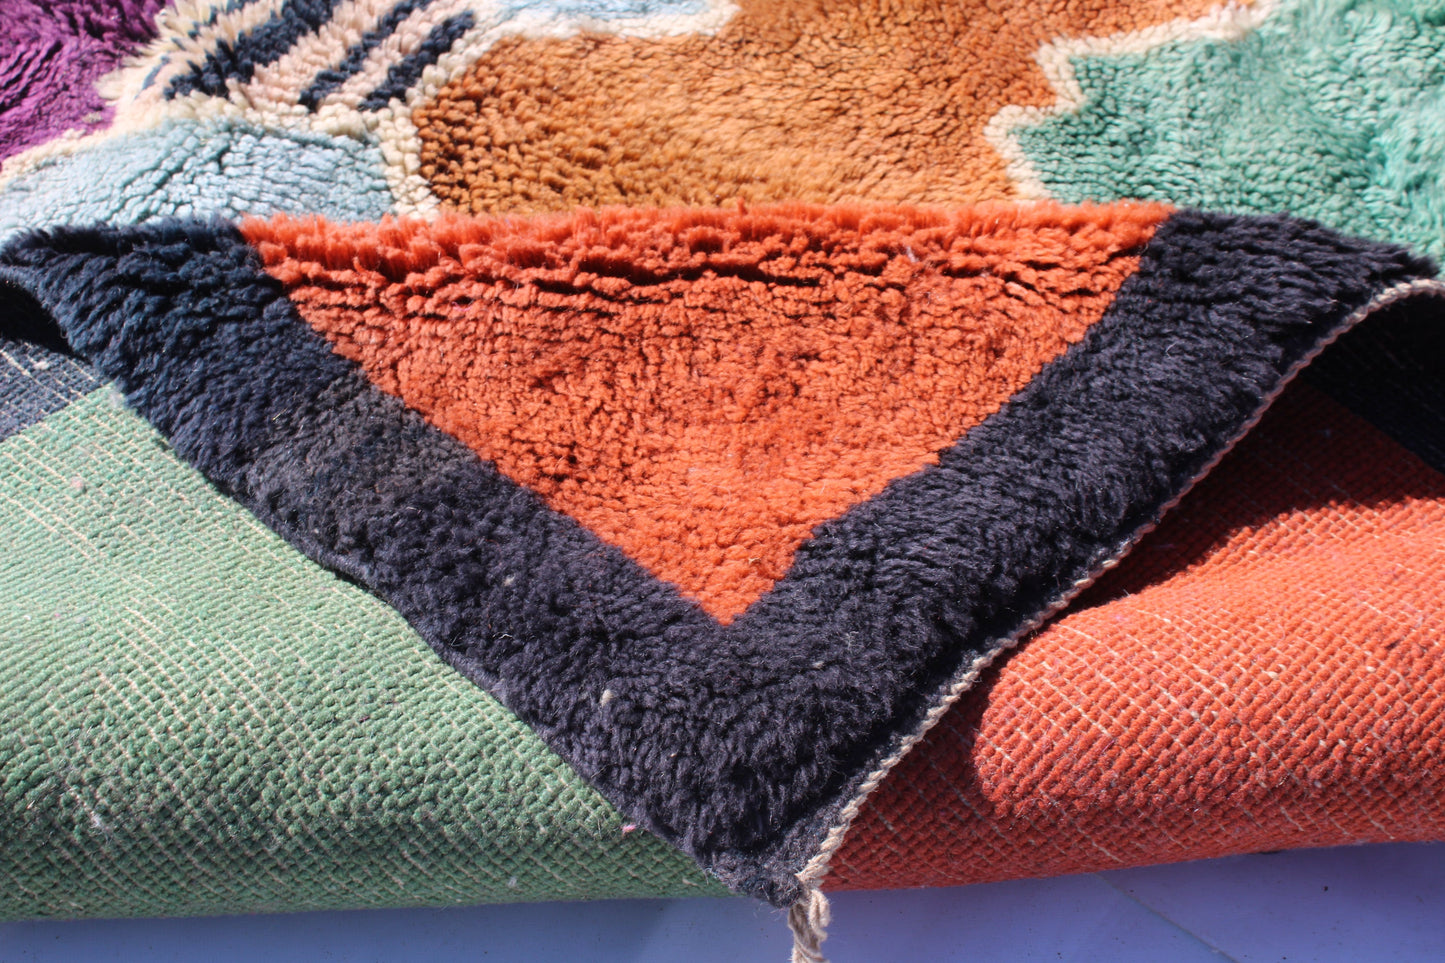 Beni Ourain rugs originate from the Atlas Mountains of Morocco and are characterized by their distinctive, neutral-toned, and geometric designs. These handwoven rugs often feature a plush pile and are made by the Berber tribes,  size is 270x192 cm